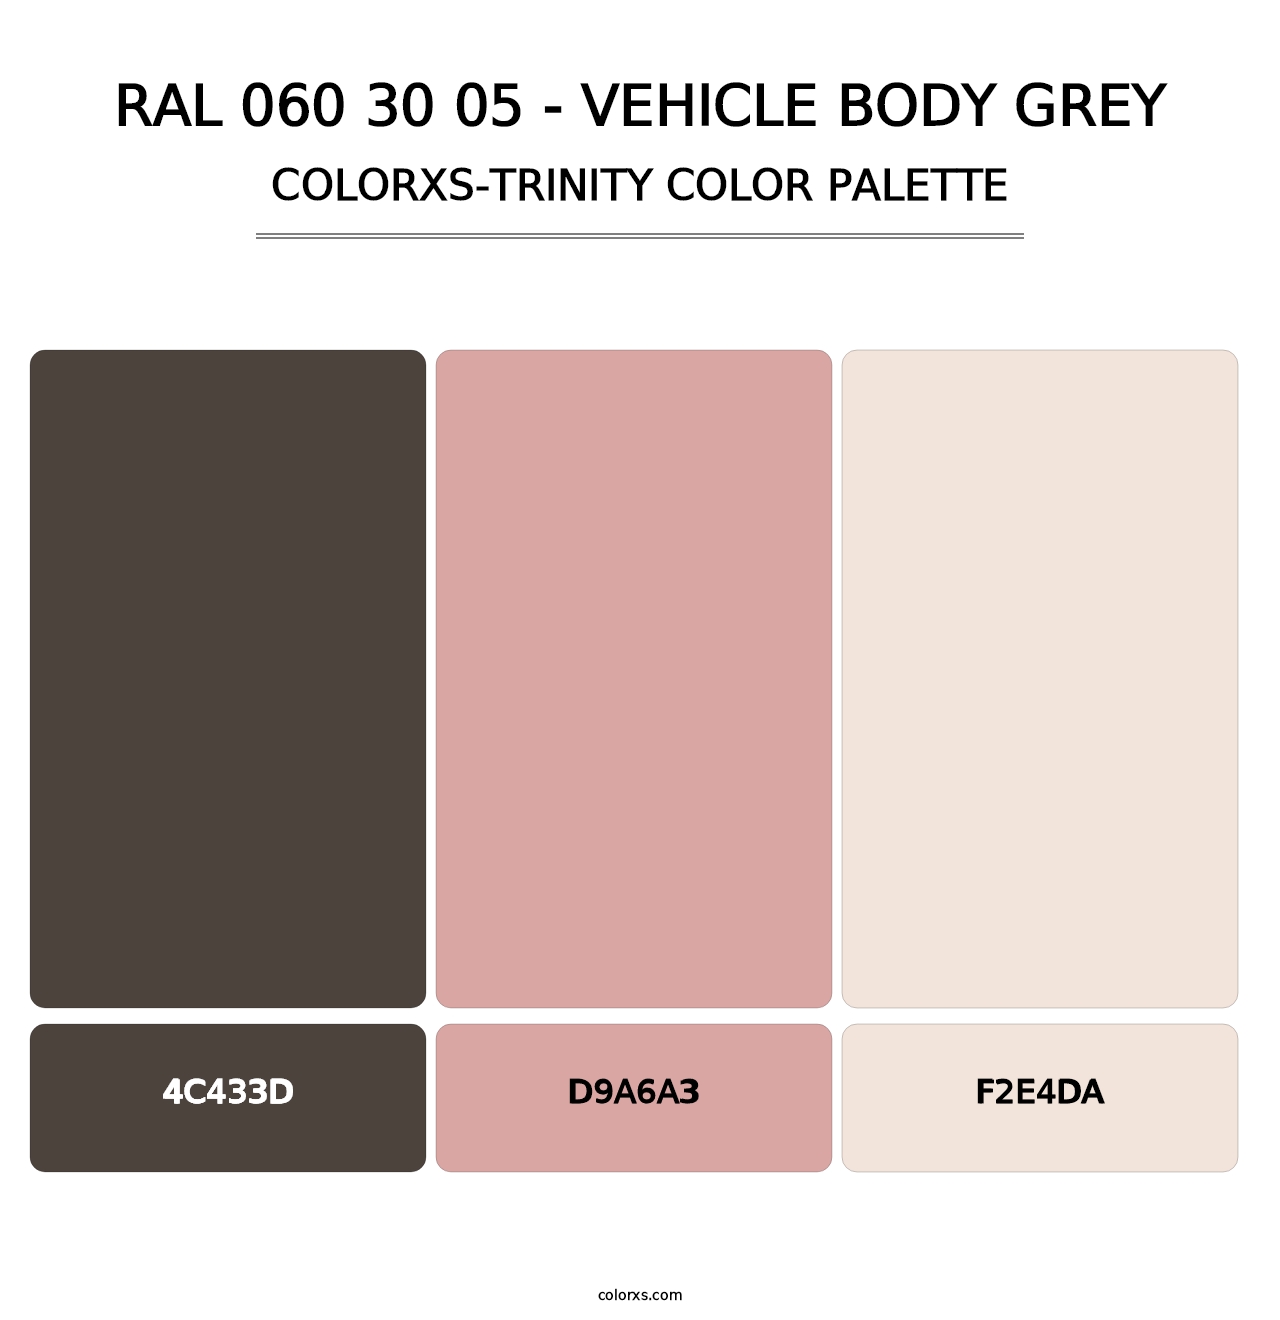 RAL 060 30 05 - Vehicle Body Grey - Colorxs Trinity Palette